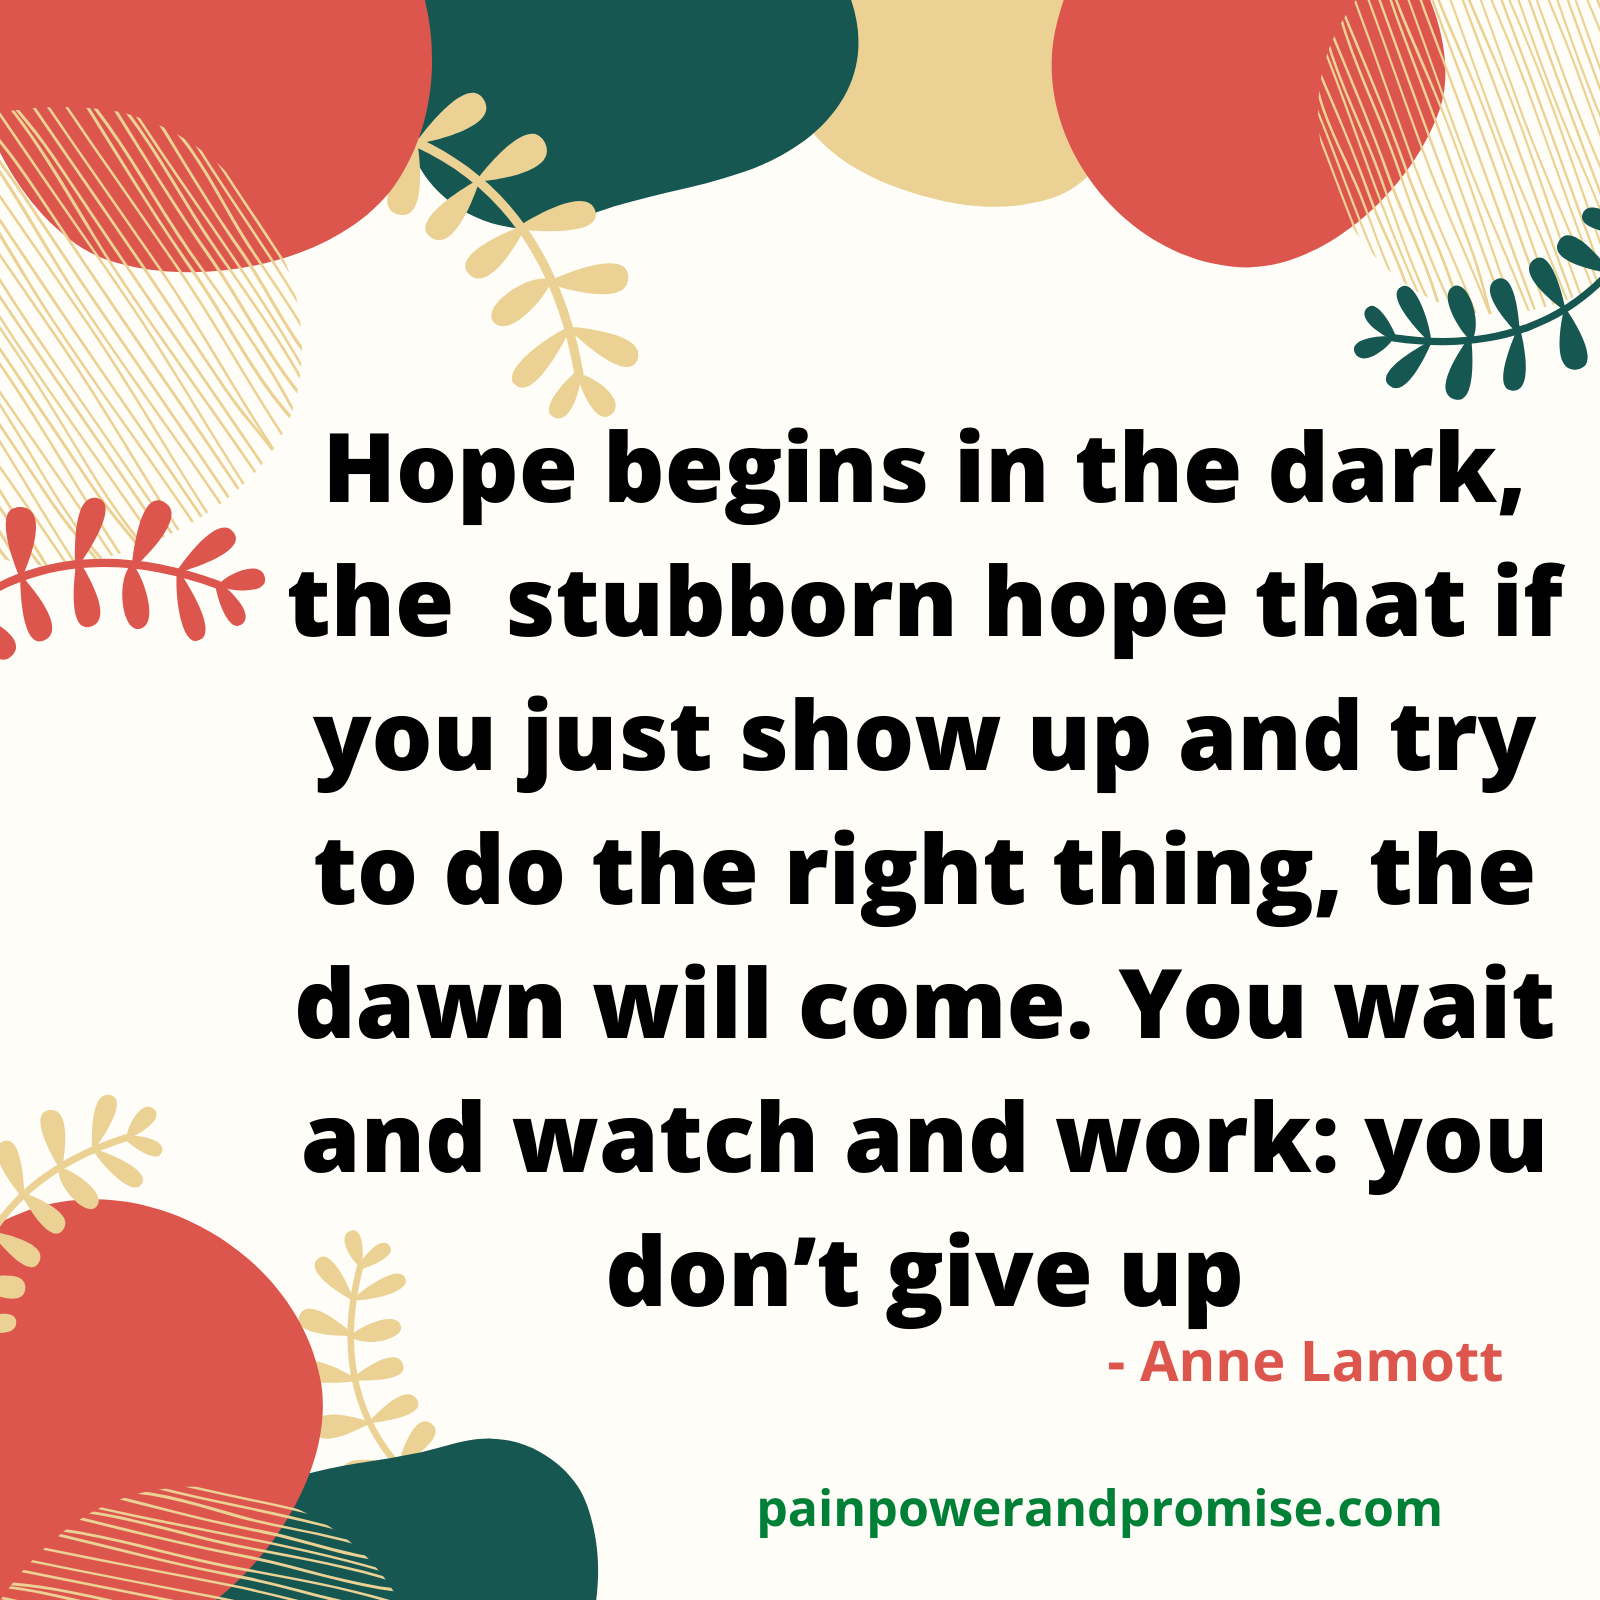 Hope begins in the dark, the stubborn hope that if you just show up and try to do the right thing, the dawn will come. You wait and watch and work: You don't give up.